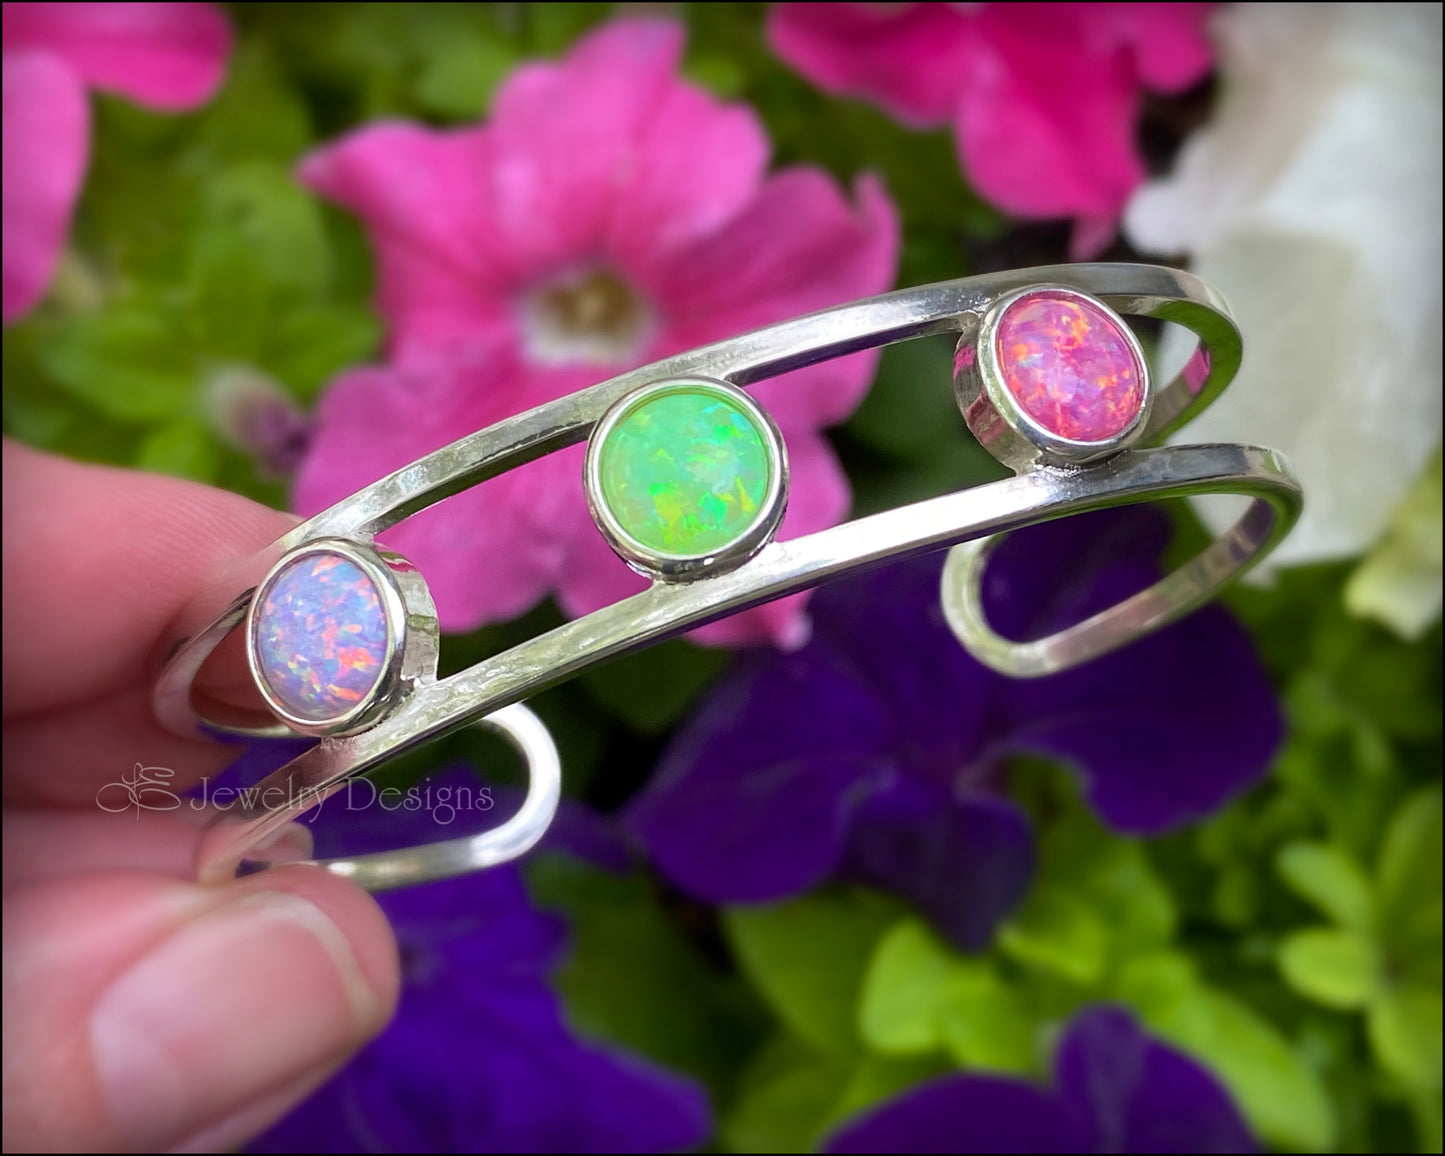 Sedona Pink Opal and Sterling Silver Toggle Bracelet – Barse Jewelry